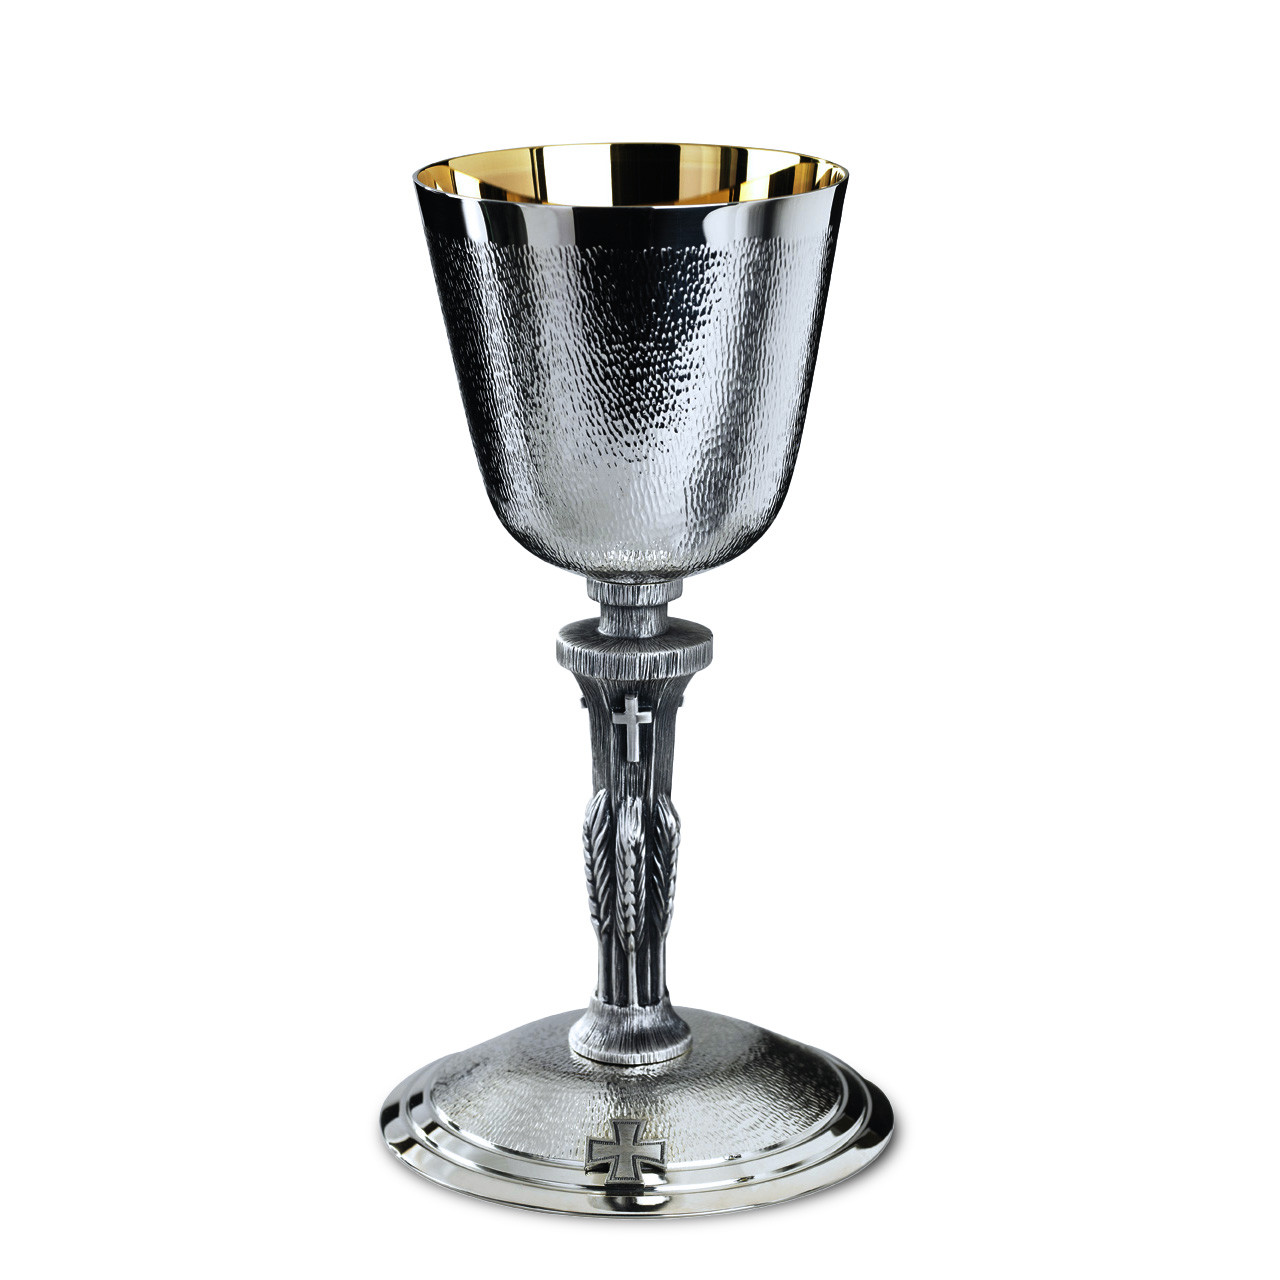 A-415 Brite-Star Chalice with Straw Texture